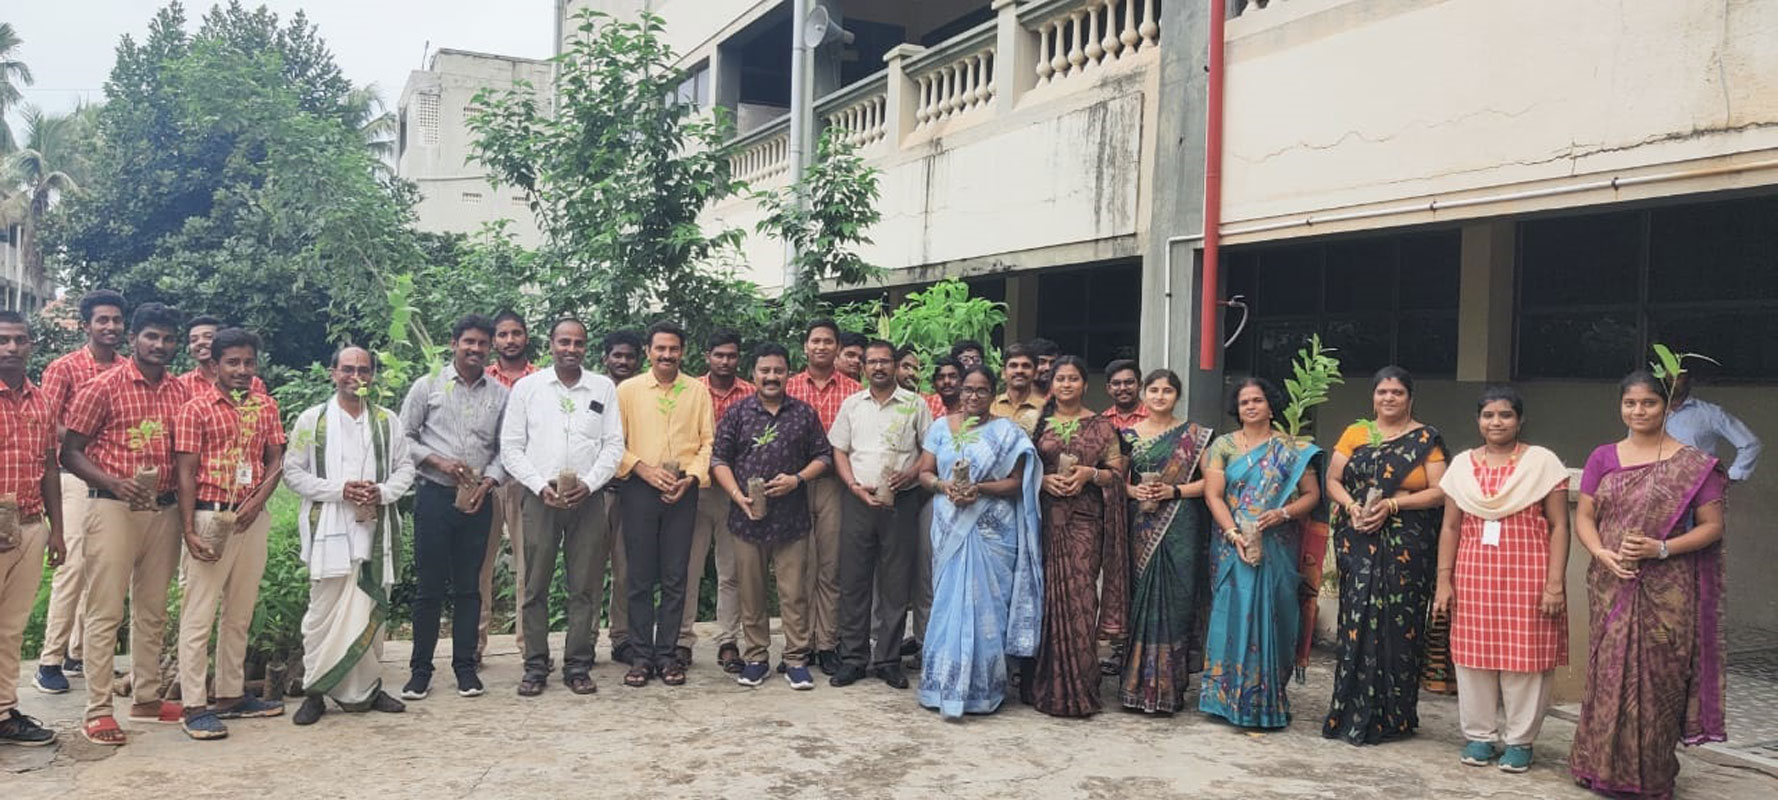  SPACES Degree College principal K Veerraju (centre), to his left is club president Pardha Saradhi Ayyangar, second from right is RAC Sabala president Lahari with Rotaractors, students and faculty. 